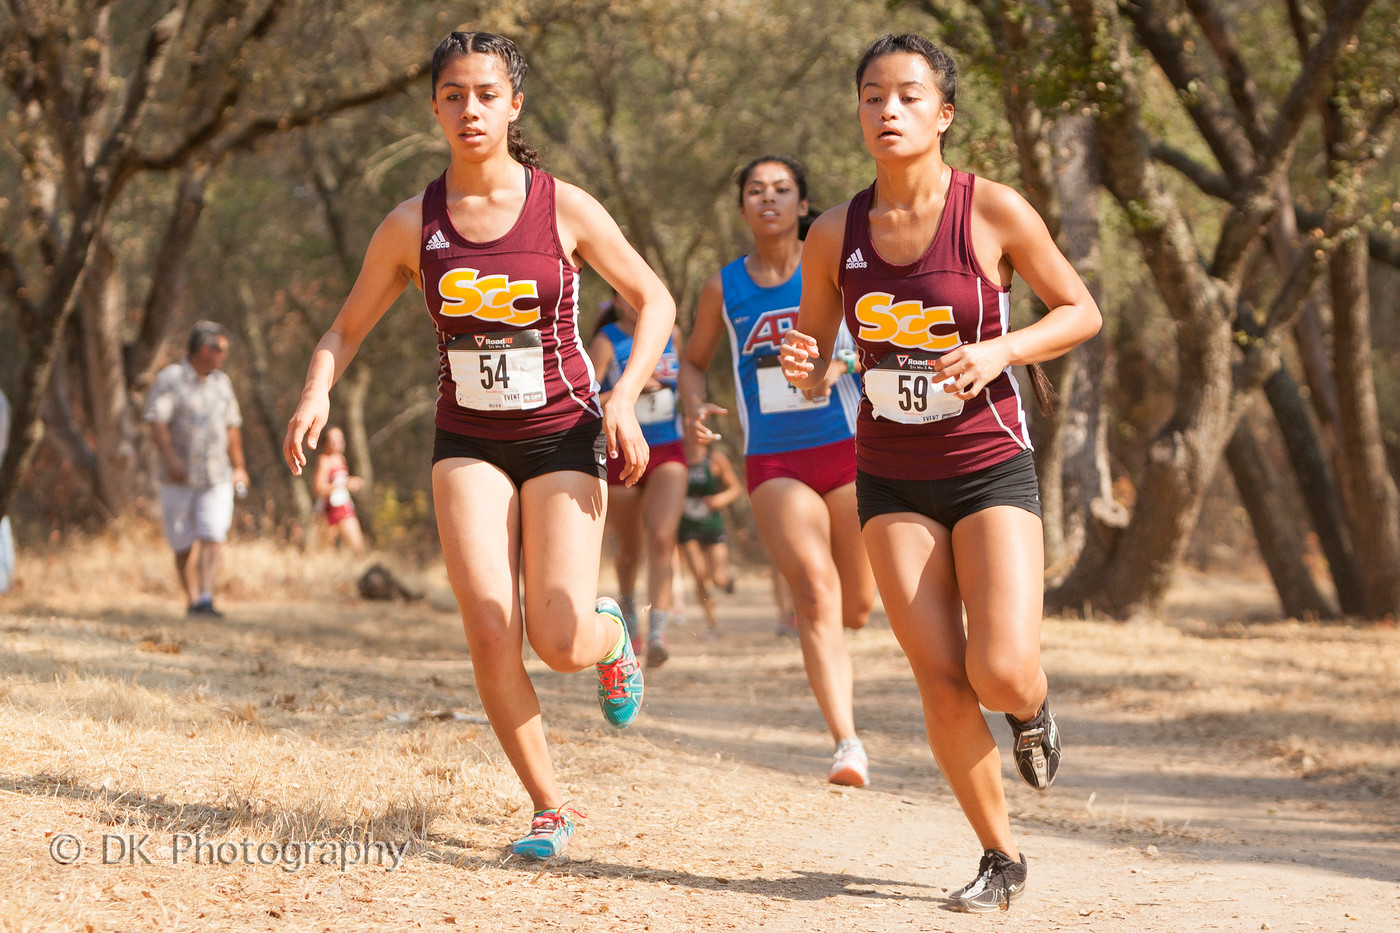 Gonzalez-Rodriguez leads the Panthers with her 17th place finish at the Toro Park Invitational